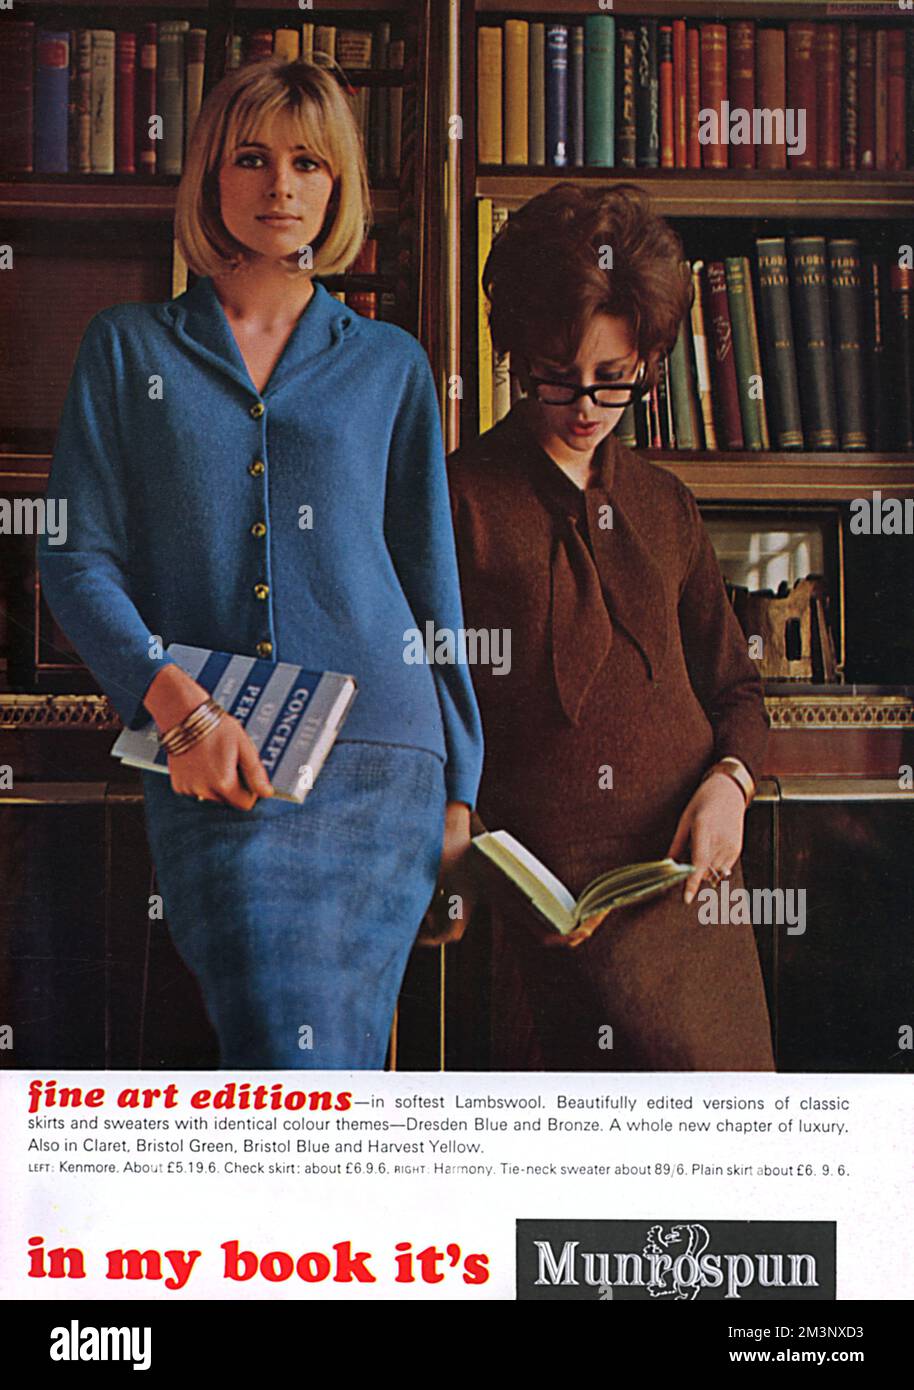 An advertisement for Munrospun knitwear of Edinburgh featuring two glamorous librarians, wearing skirts and sweaters in softest Lambswool.     Date: 1964 Stock Photo